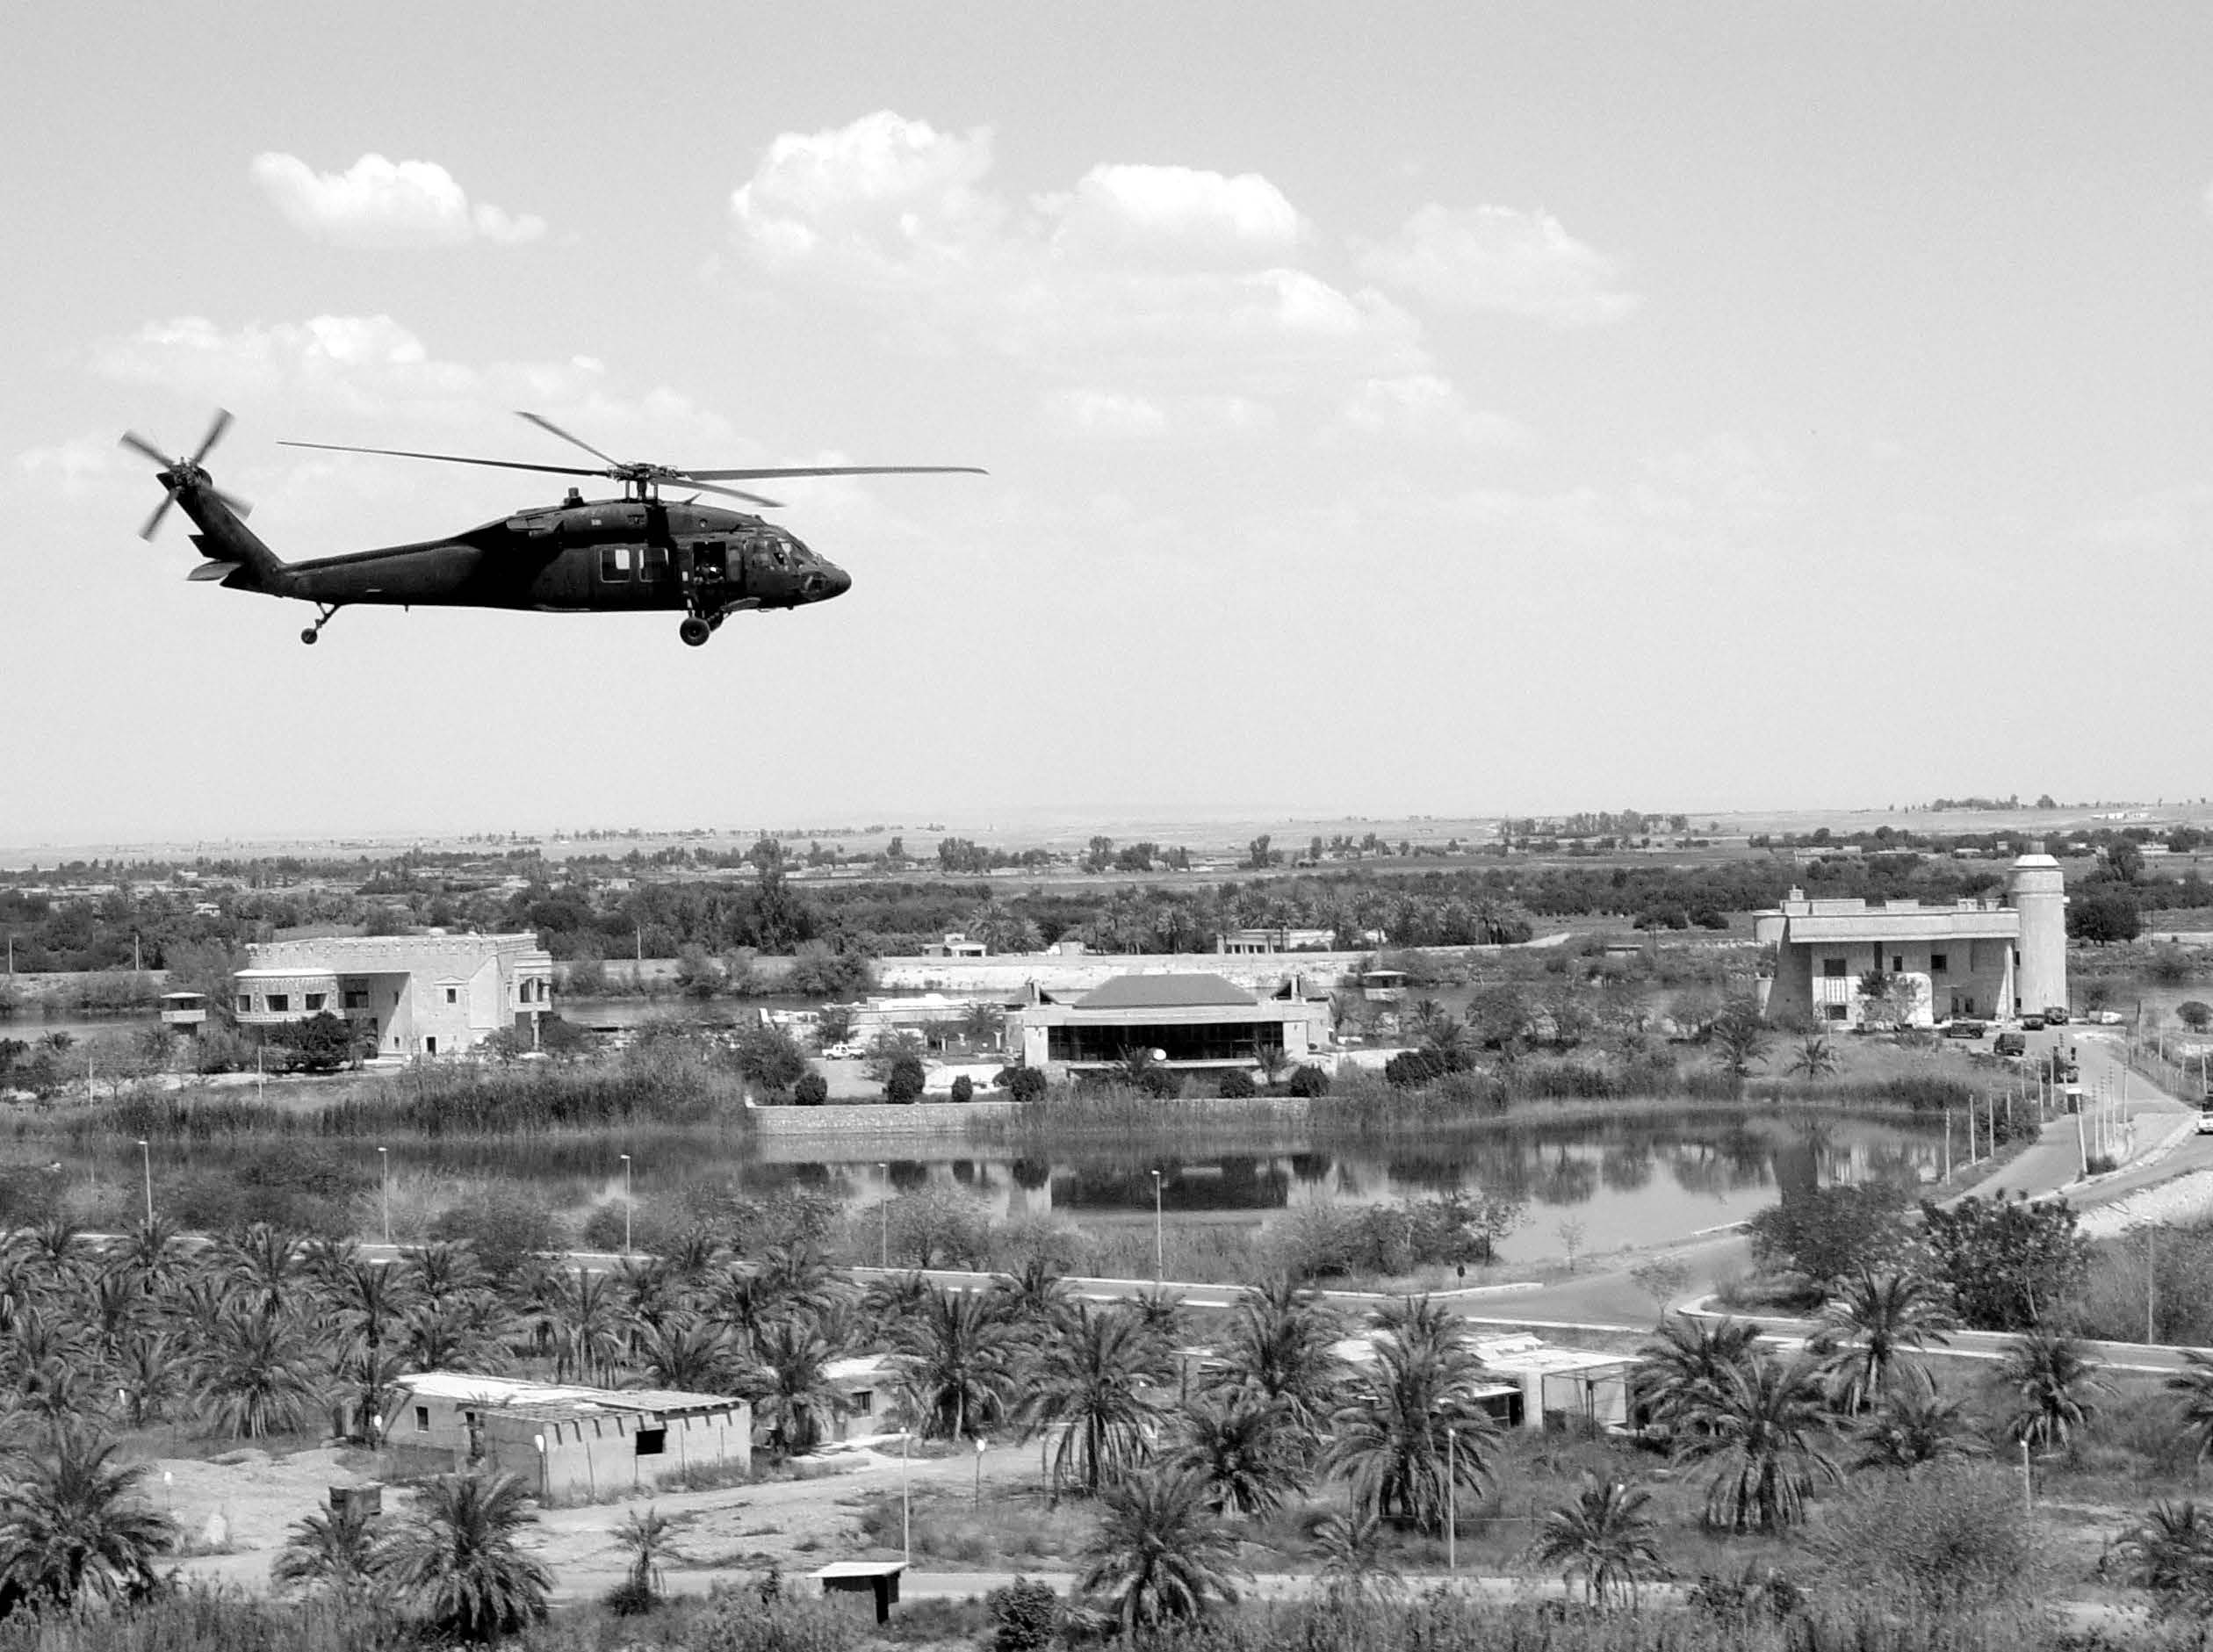 A Blackhawk helicopter from the 106th Aviation Regiment, Illinois Army National Guard flies past one of Saddam Hussein’s former palaces in Tikrit, Iraq. Courtesy of DoD.